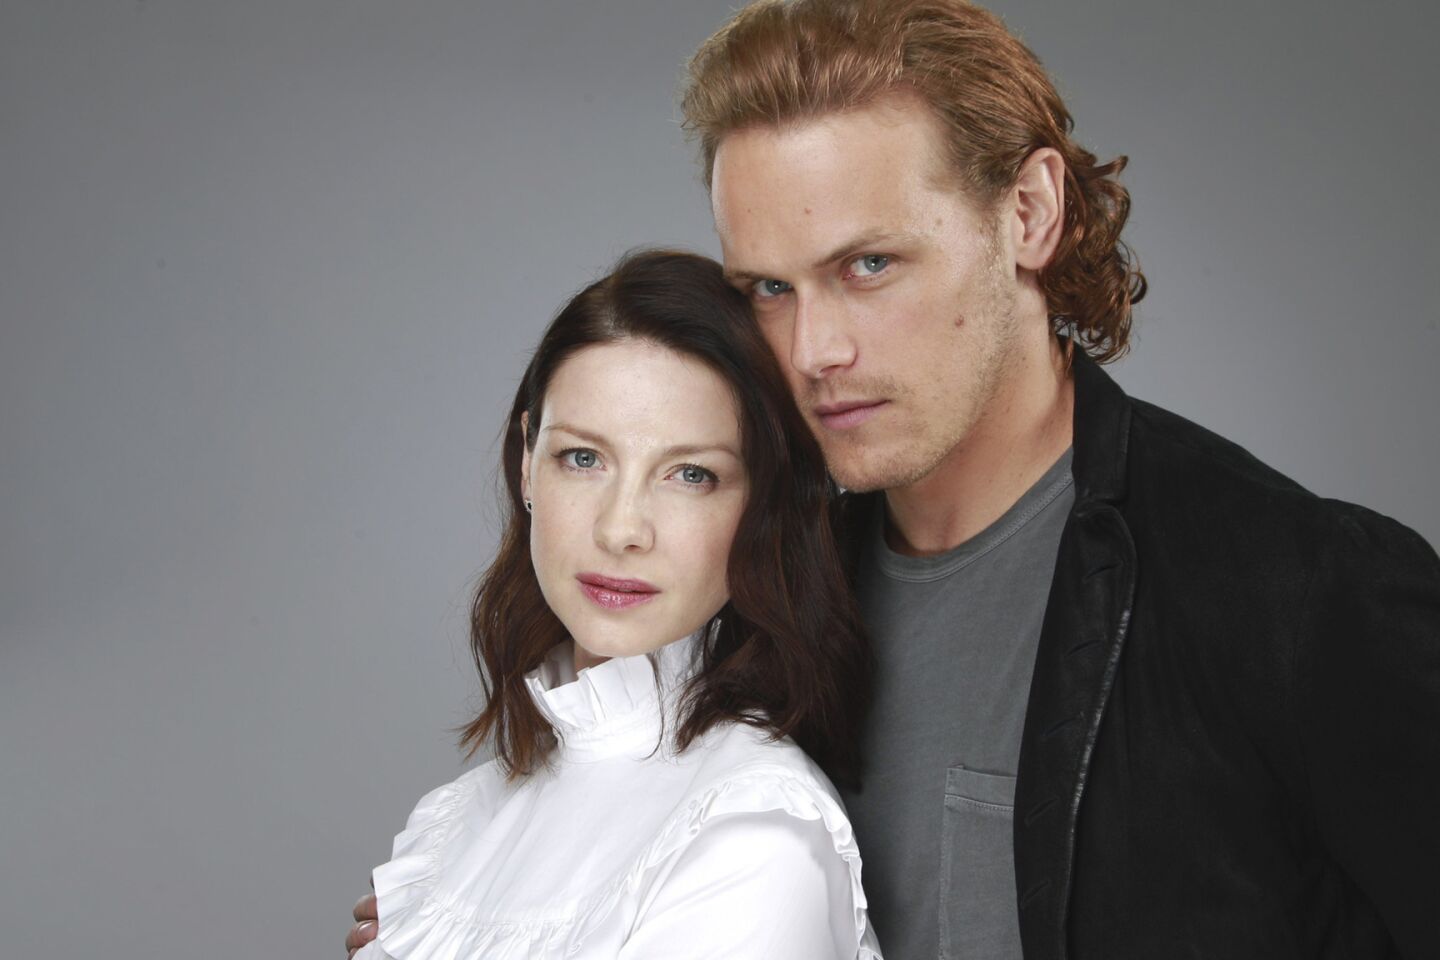 Celebrity portraits by The Times | Caitriona Balfe and Sam Heughan